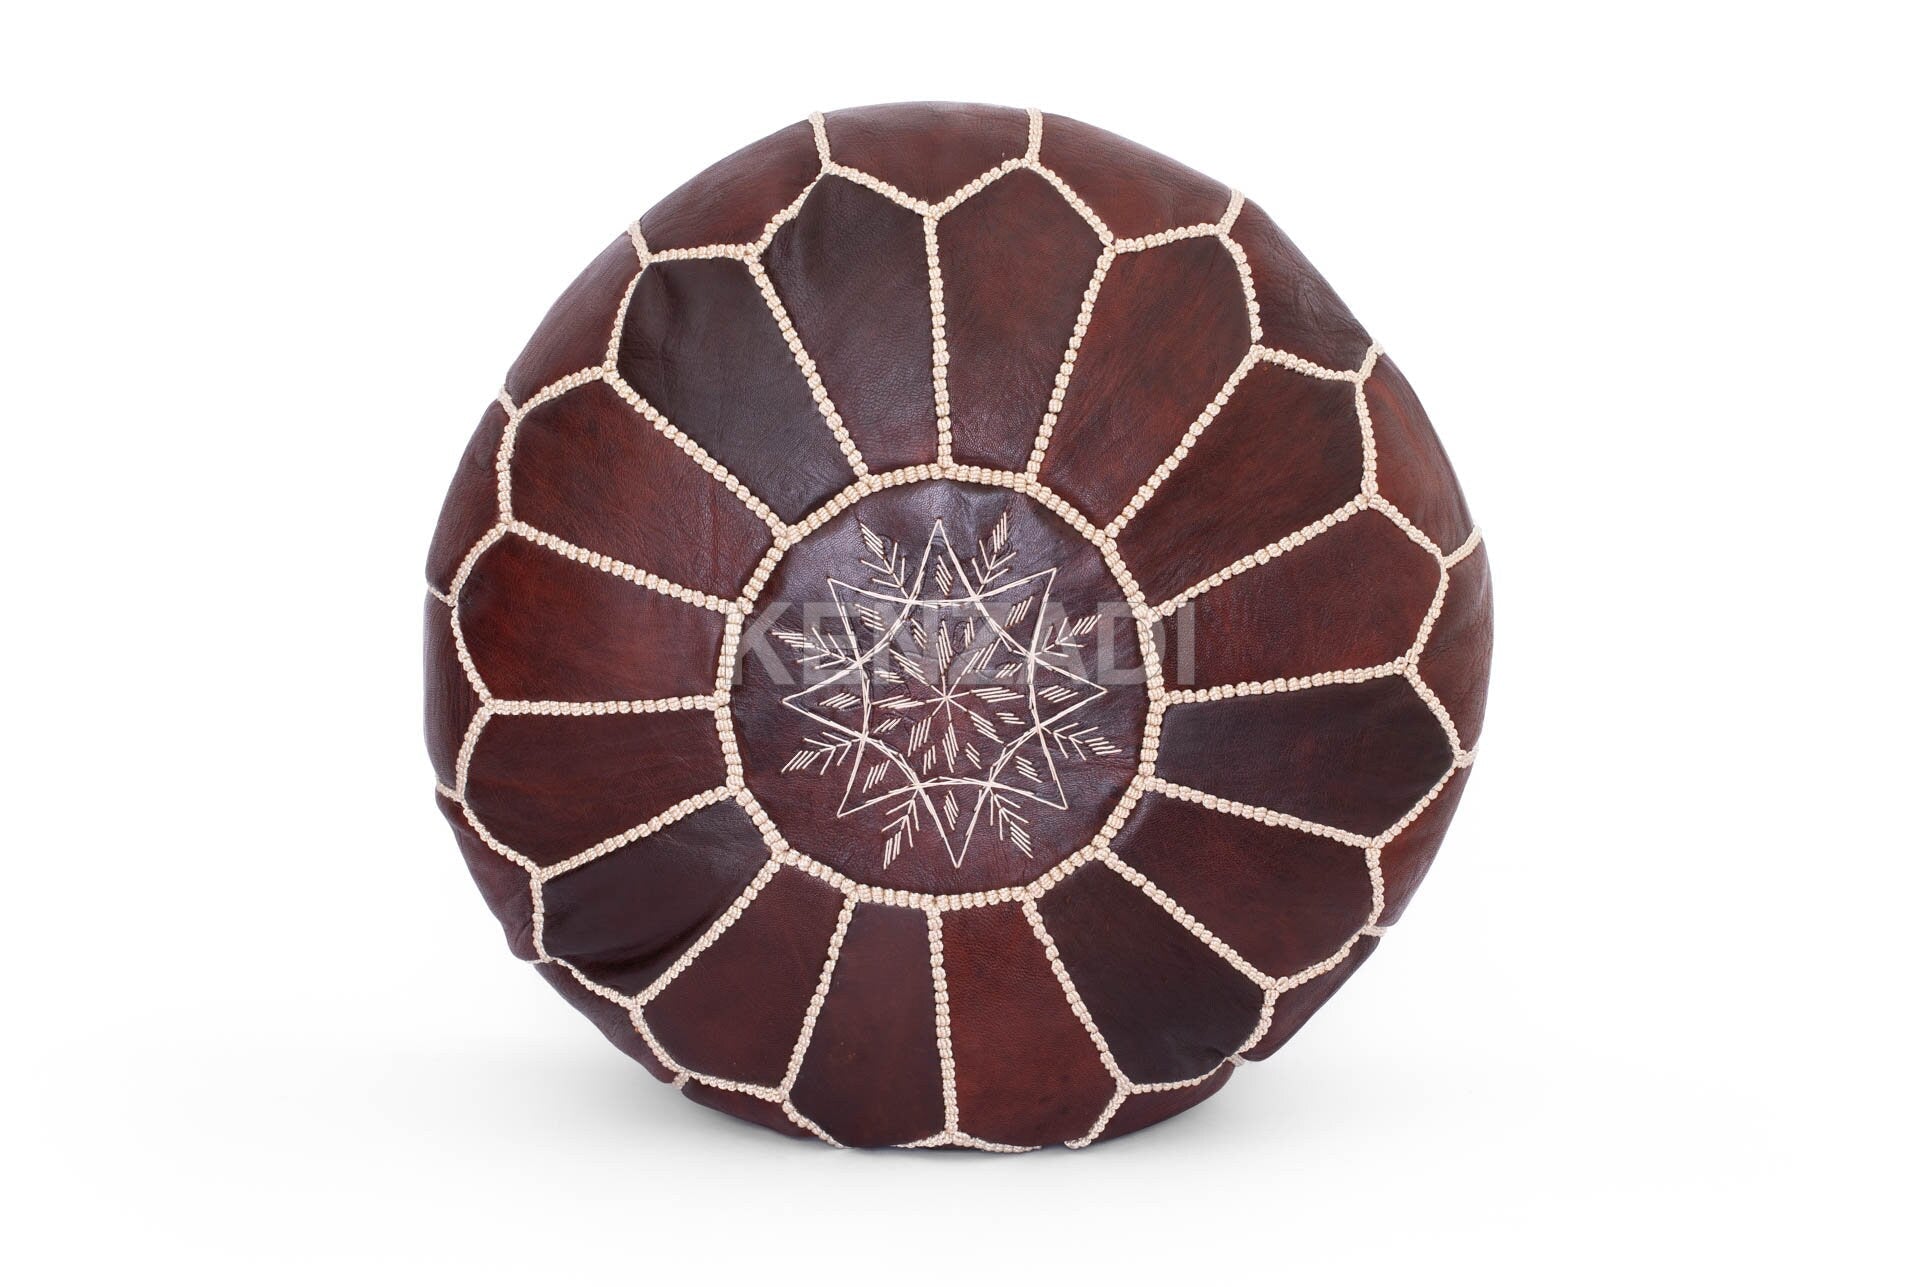 Authentic Moroccan leather pouf with beige embroidery, dark brown color, hand-sewn, perfect for adding a bohemian touch to your home decor